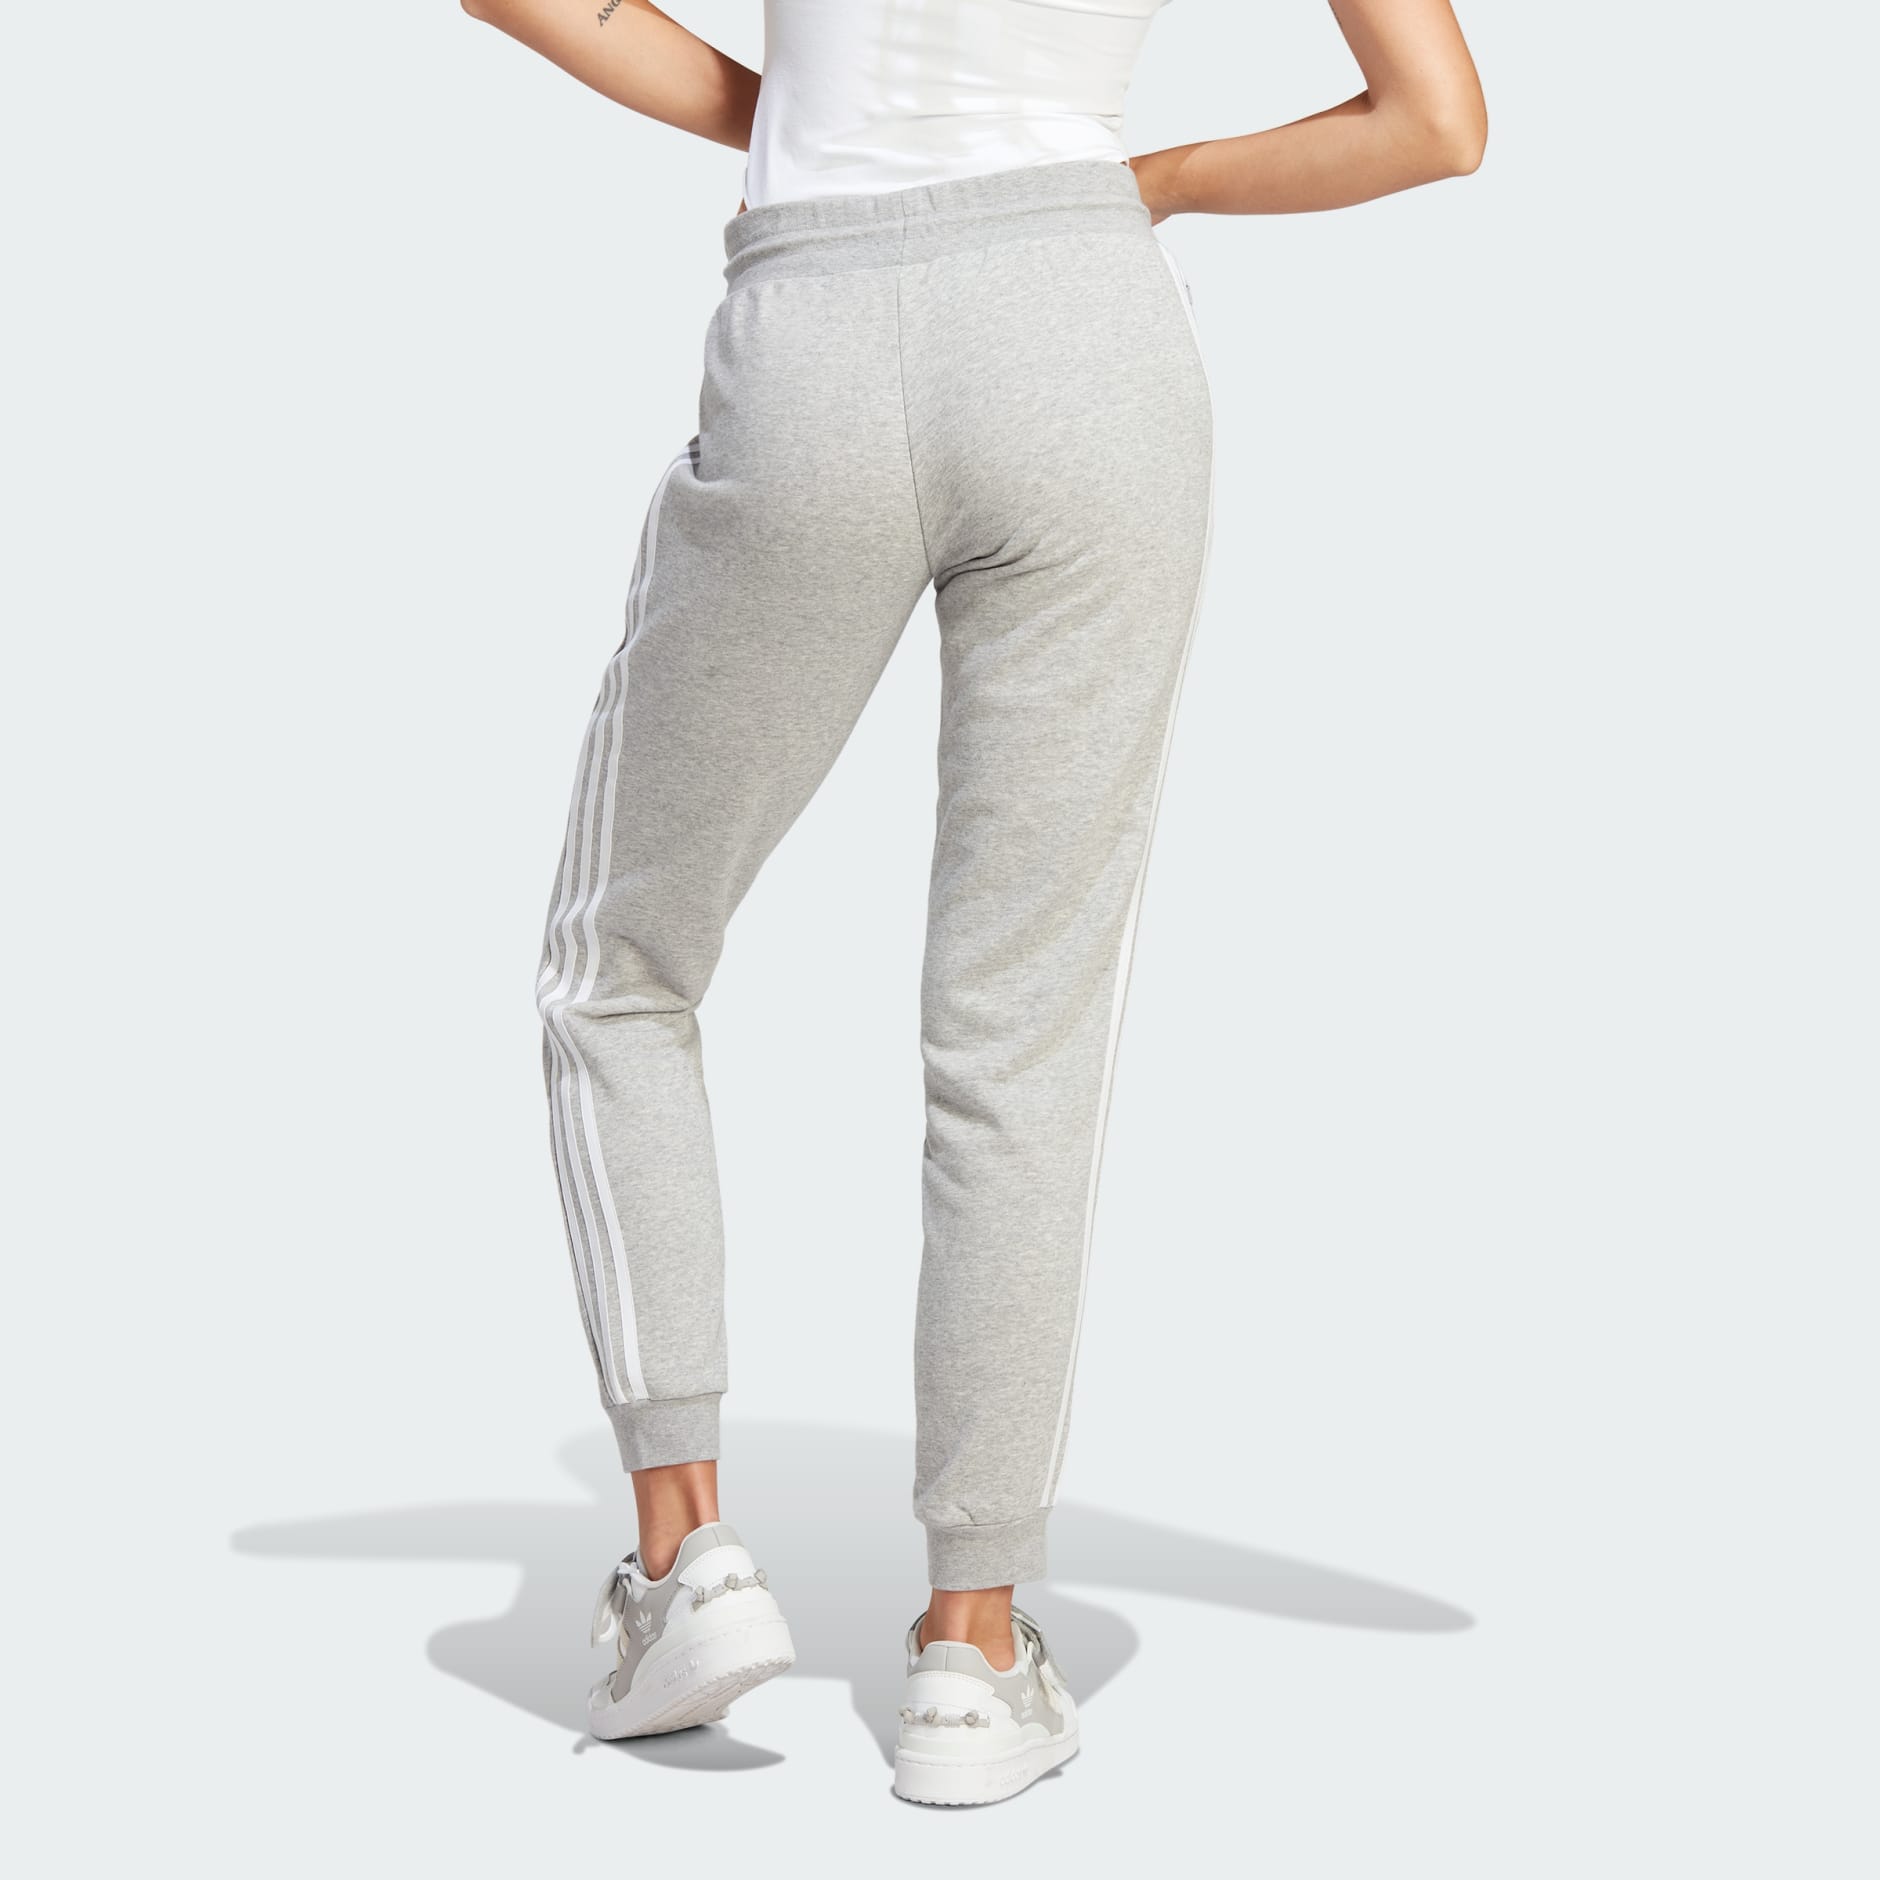 Women with Control Regular Everyday Cuff Pants with Inverted Pleat - QVC.com